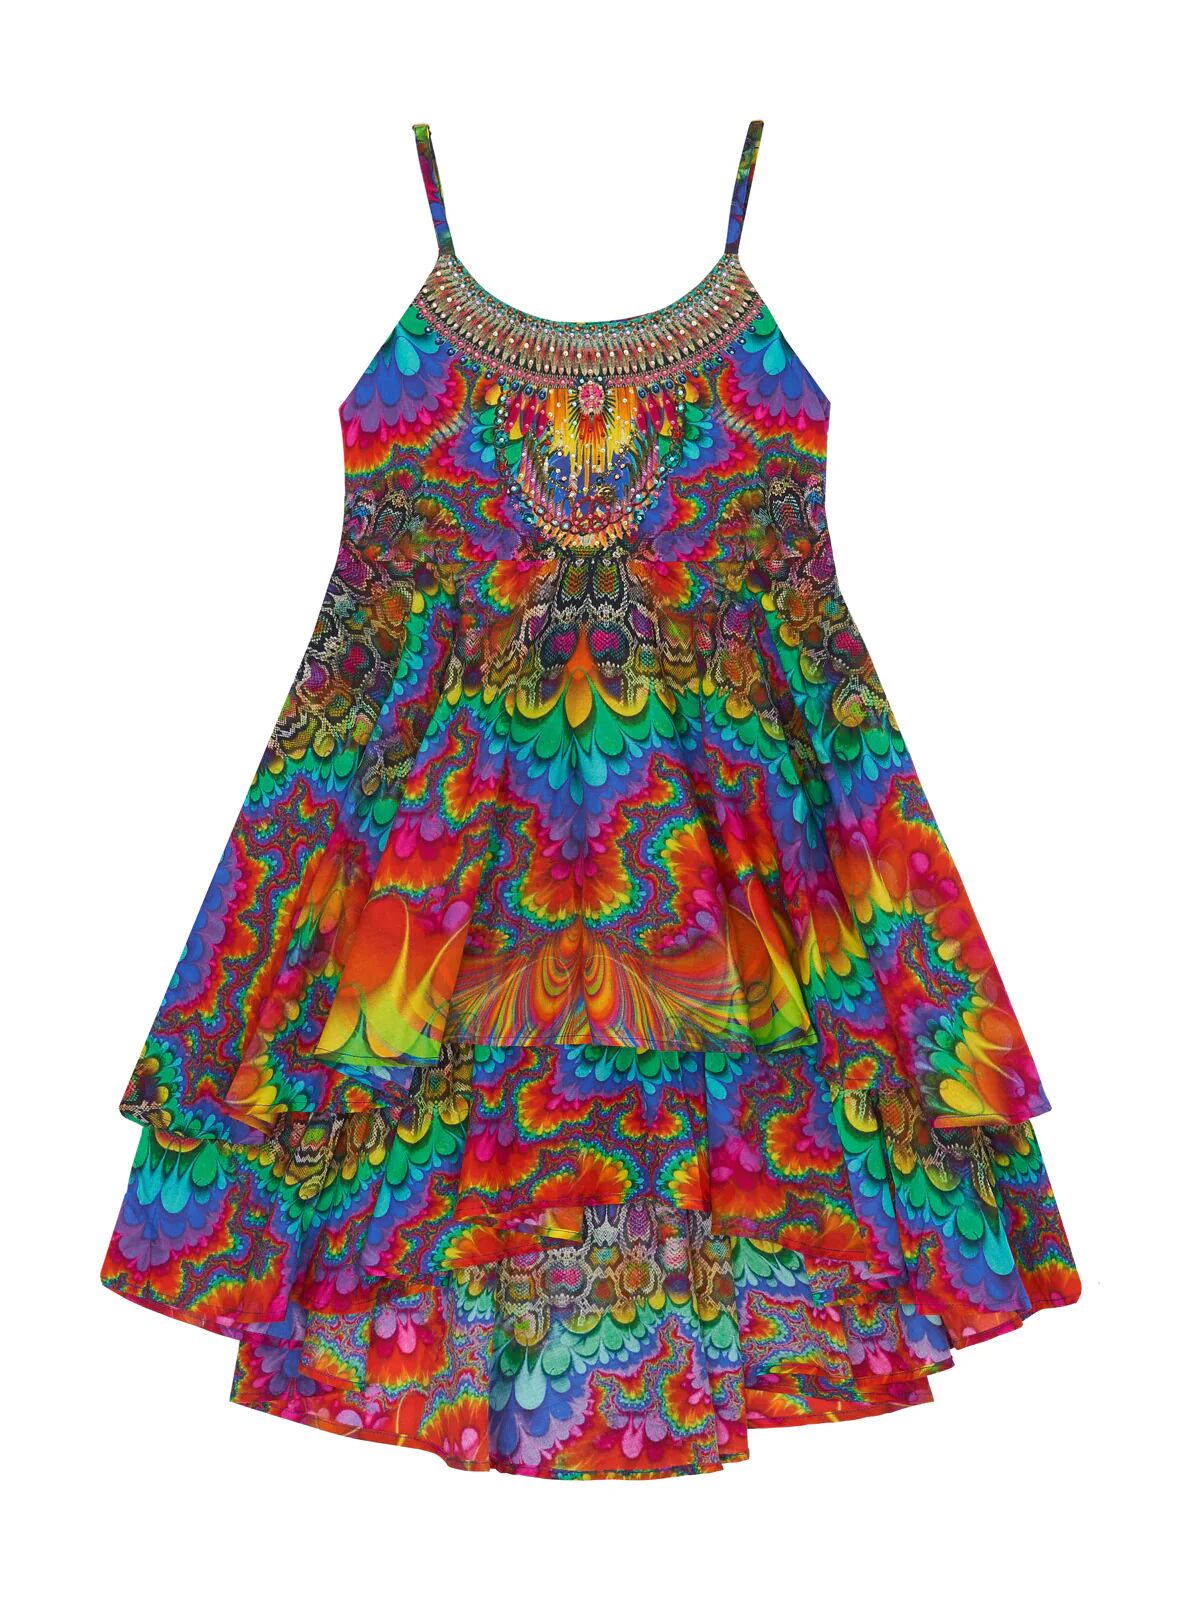 Camilla eBoutique Kids Layered Dress 12-14 Coming Down from Cosmos, 12  - Size: 12